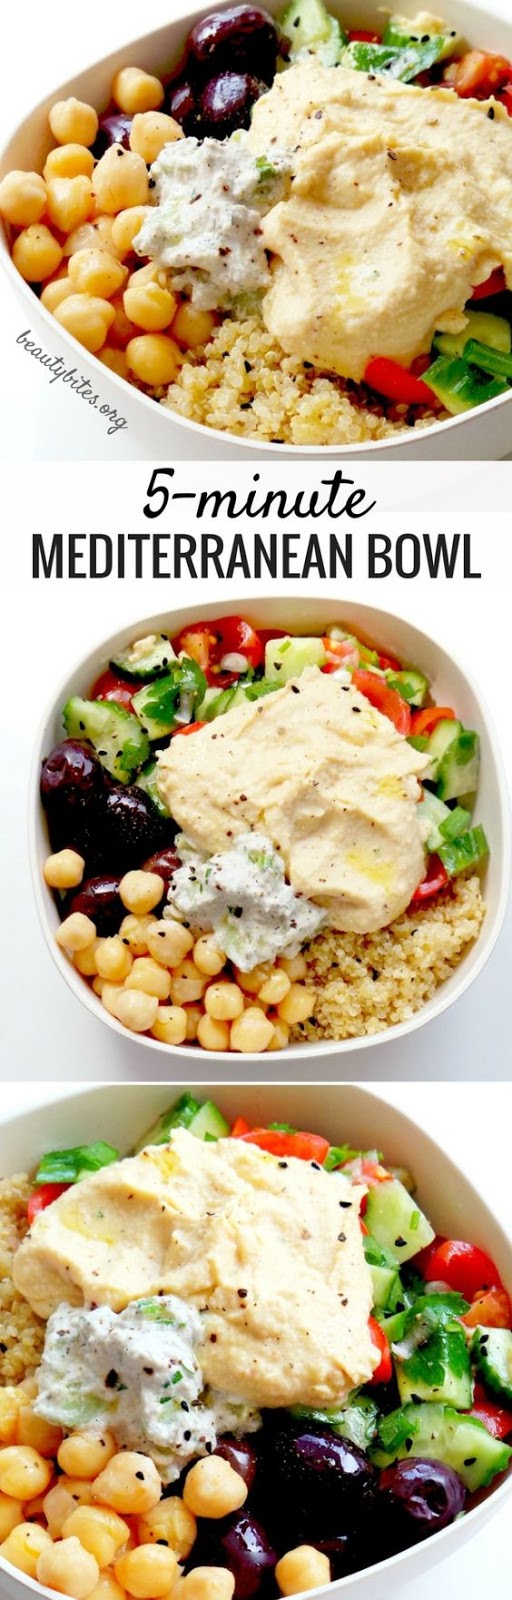 Super easy and healthy Mediterranean bowl recipe that is ready in no time! This is a healthy vegan meal prep lunch recipe you'll love!